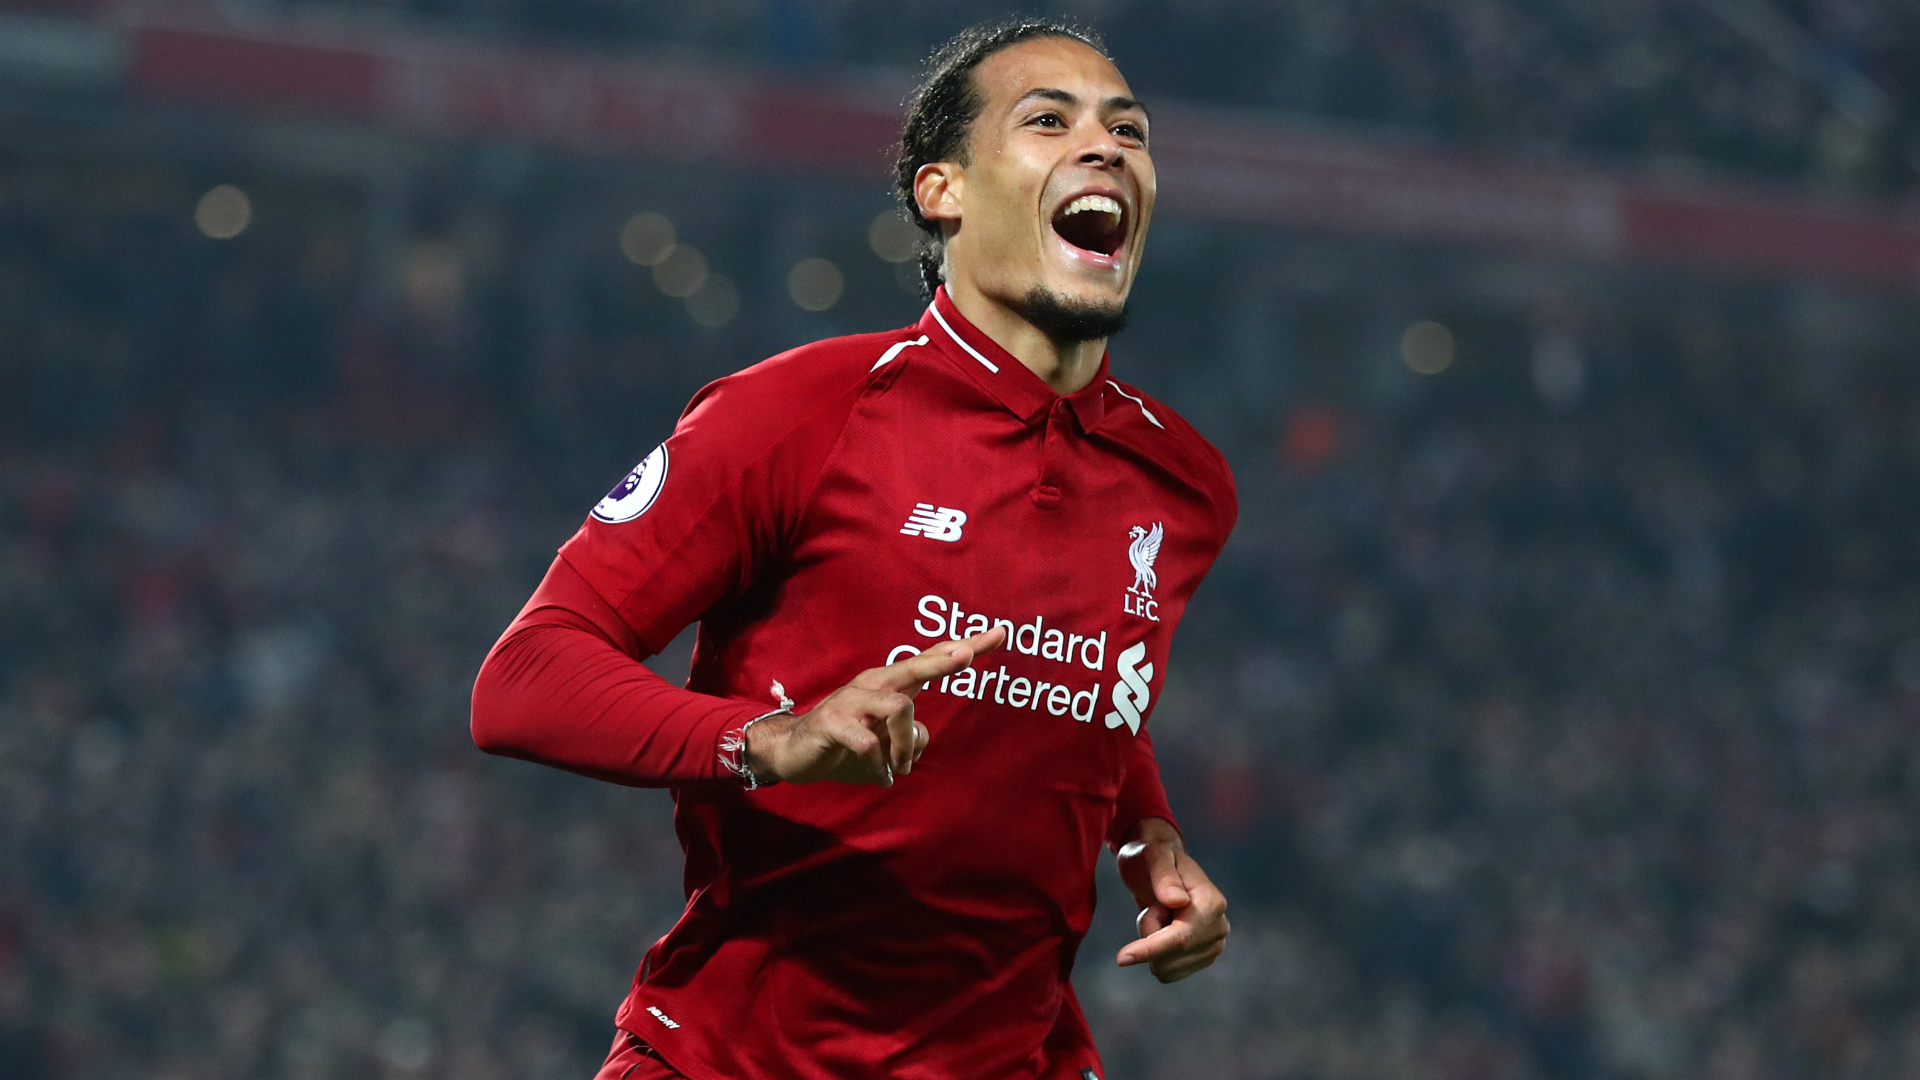 Virgil van Dijk faces competition from Raheem Sterling and four other stars after the PFA Player of the Year nominations were revealed.